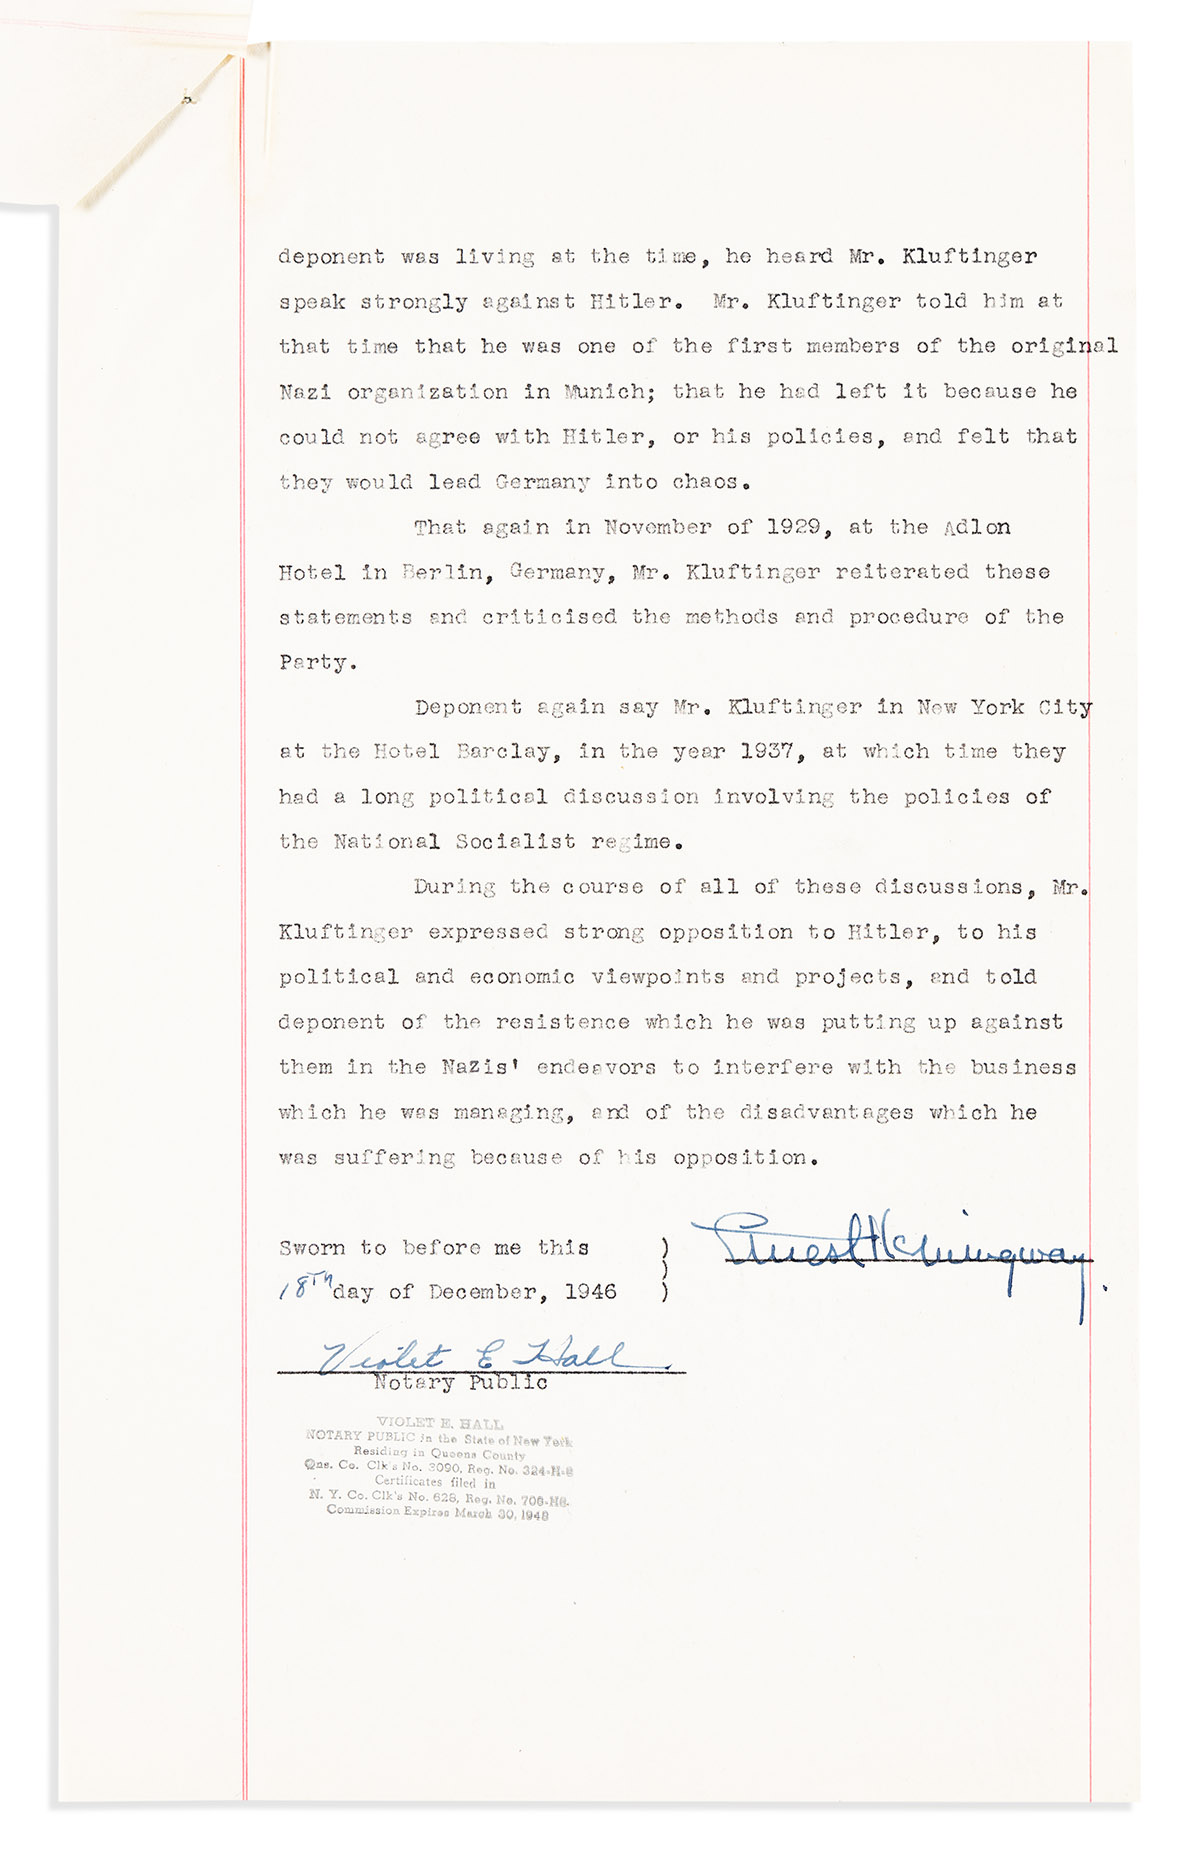 HEMINGWAY, ERNEST. Typed Document Signed, deposition defending business executive Leonhard M. Kluftinger from accusations that he harbo